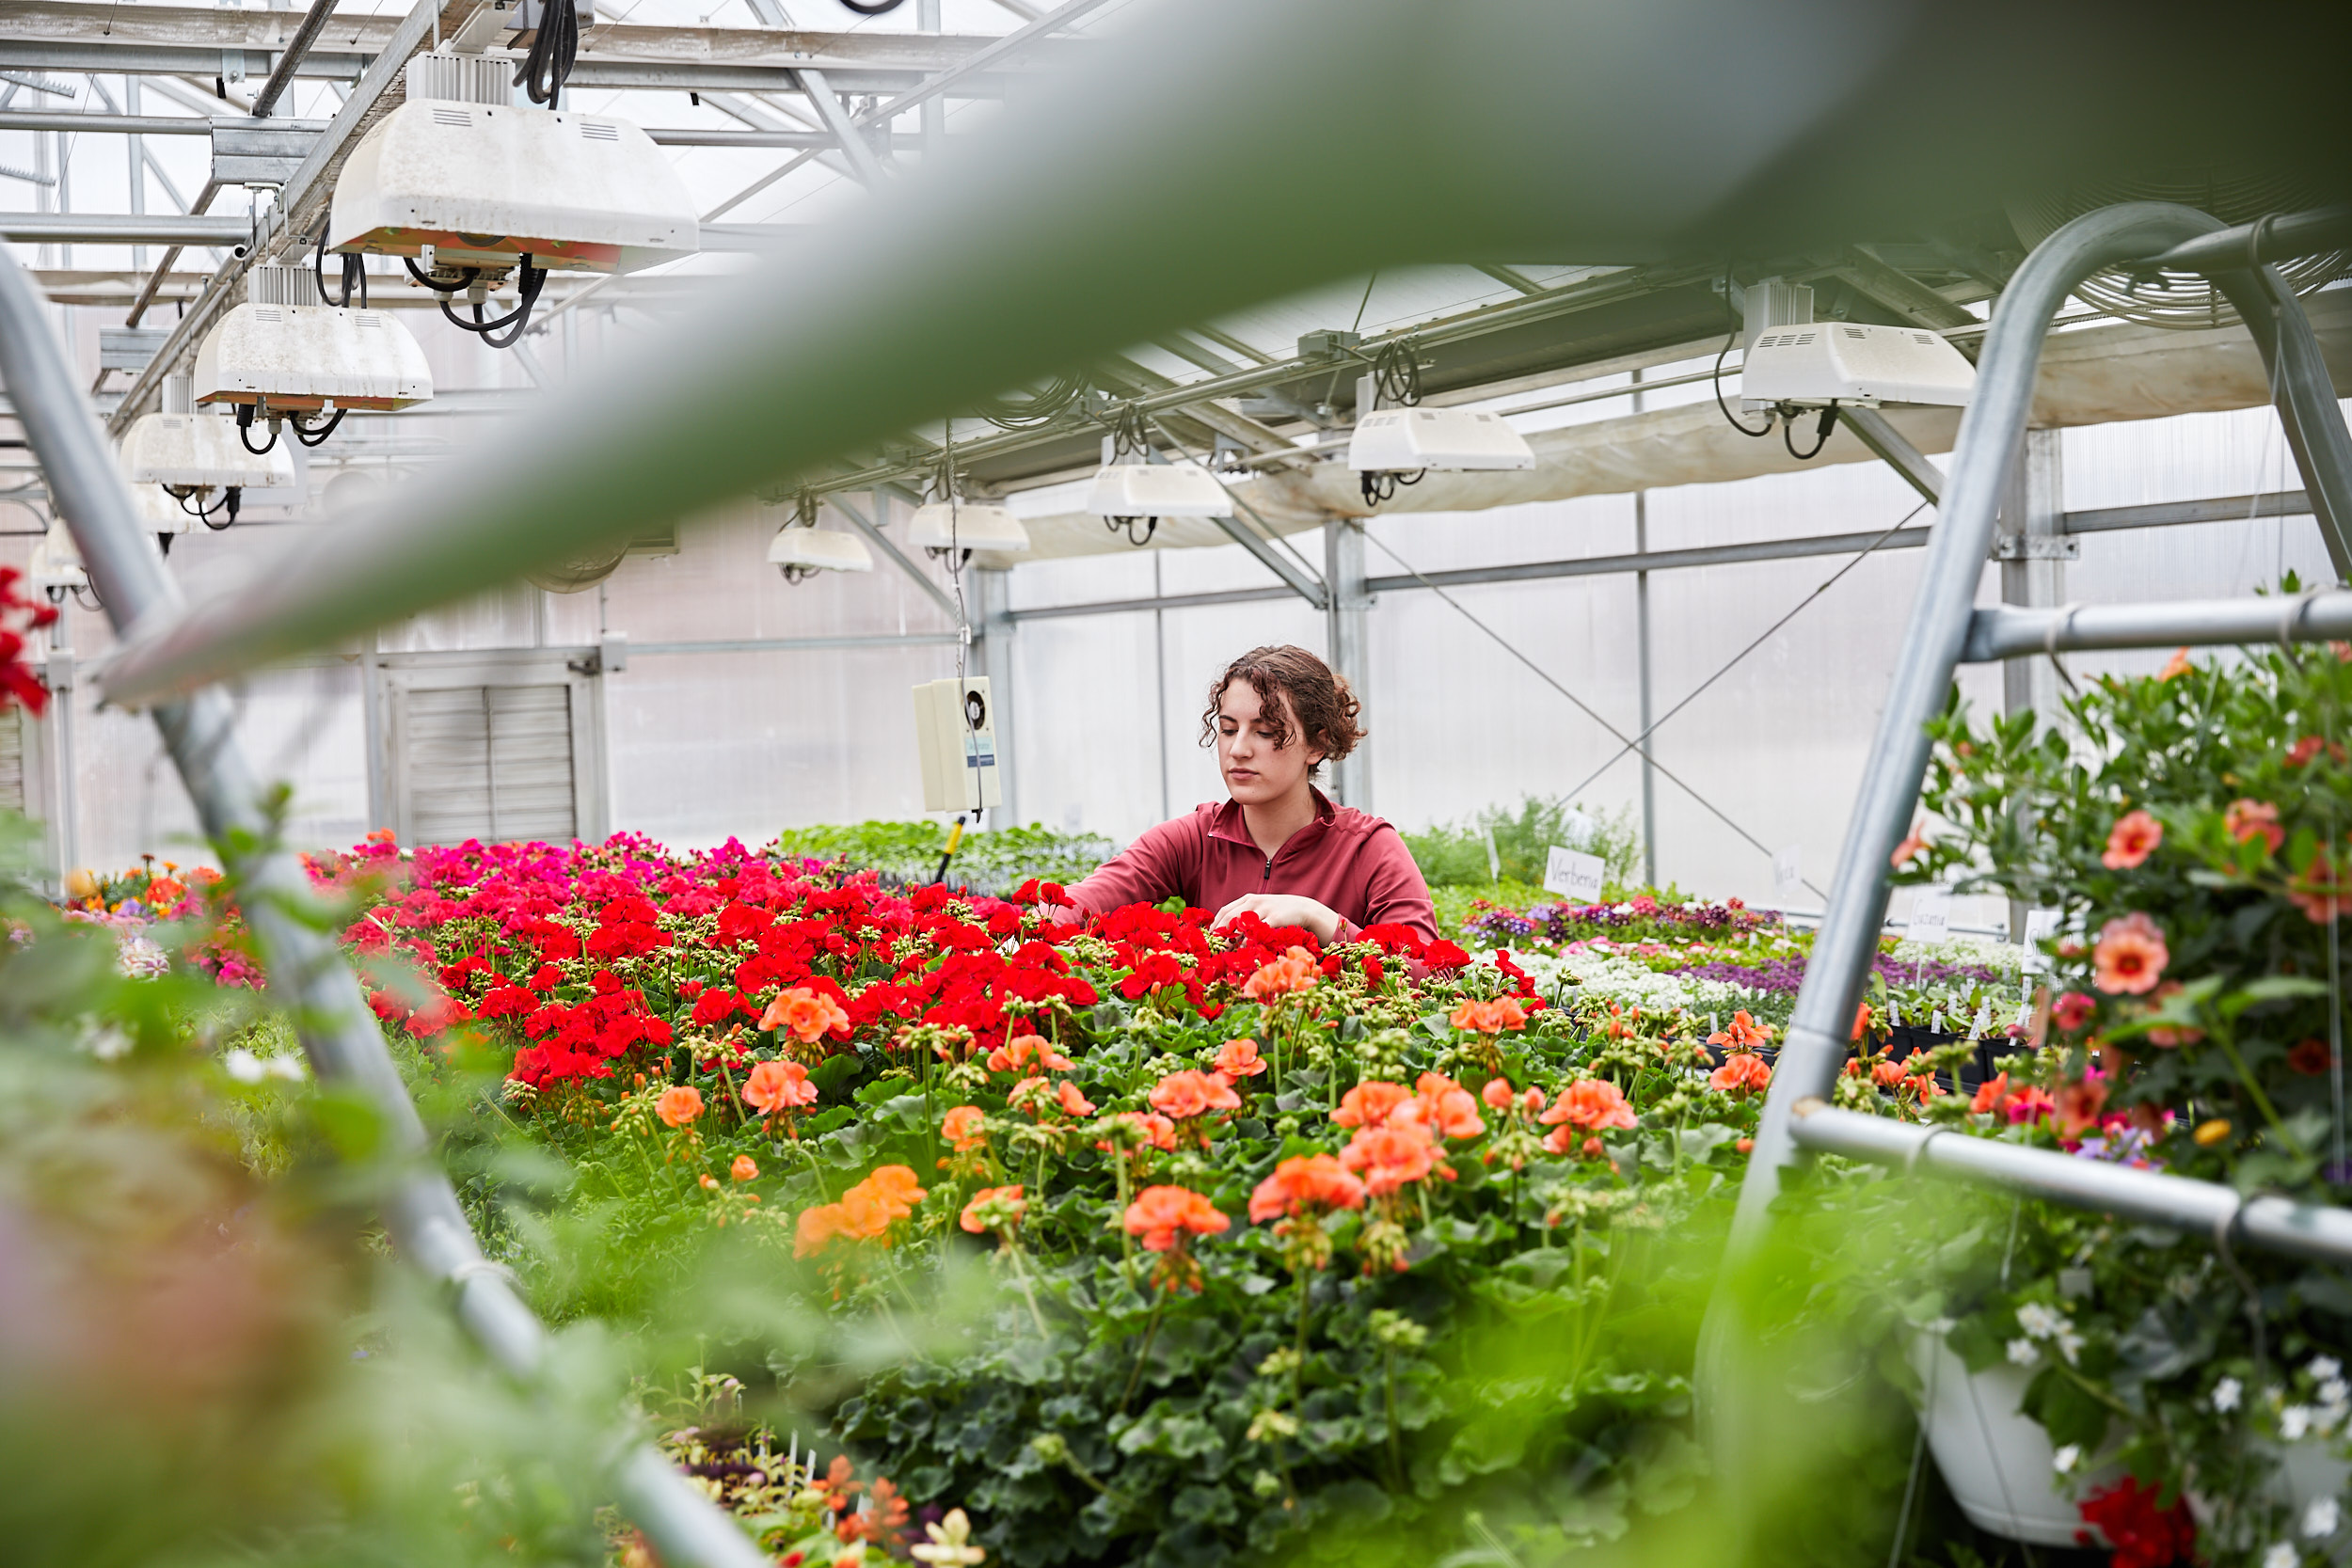 Windsor High School student in greenhouse - John Robson Photography